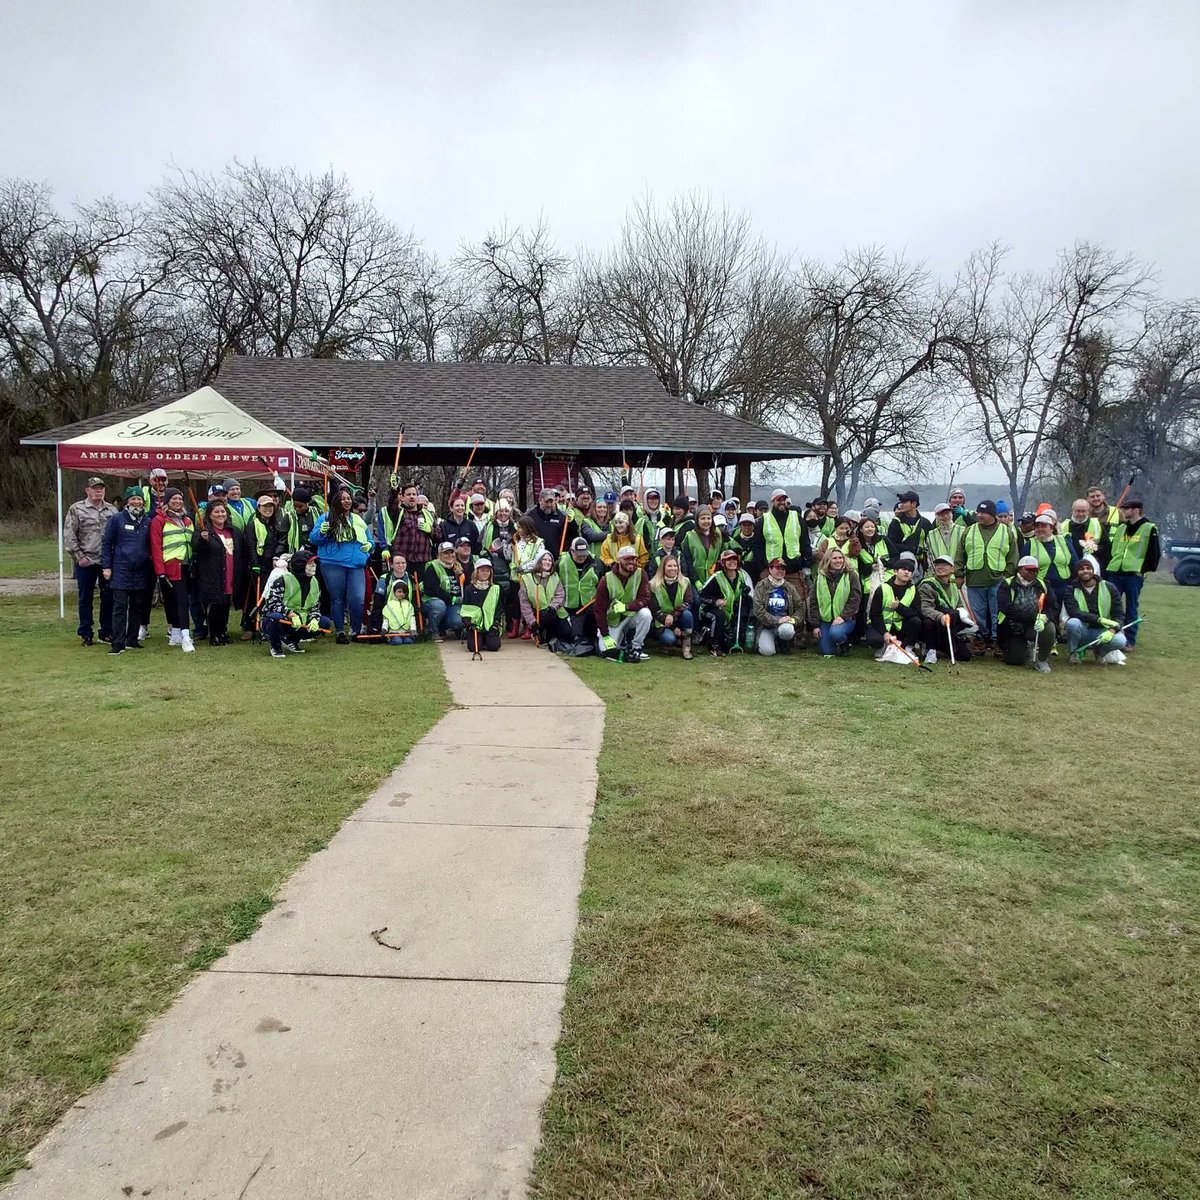 Had the pleasure of covering a community cleanup at Lloyd park at Joe pool lake with Keep Texas Beautiful and the Yeungling company. #keeptexasclean #keeptexasbeautiful, #texasindependenceday